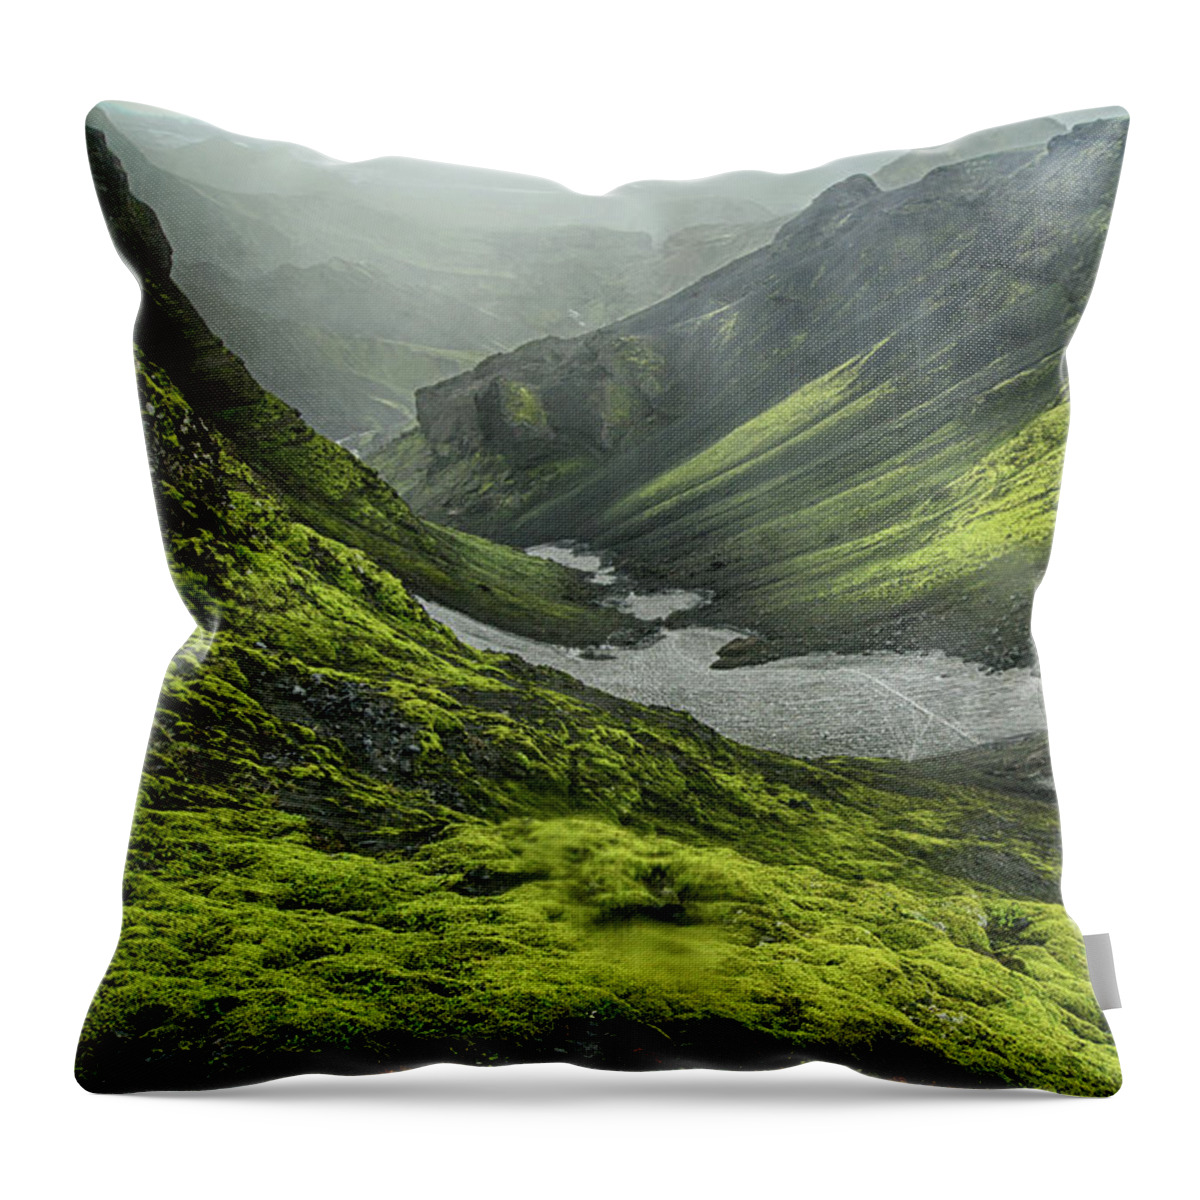 Prott Throw Pillow featuring the photograph Eyjafjallajokull Iceland 4 by Rudi Prott